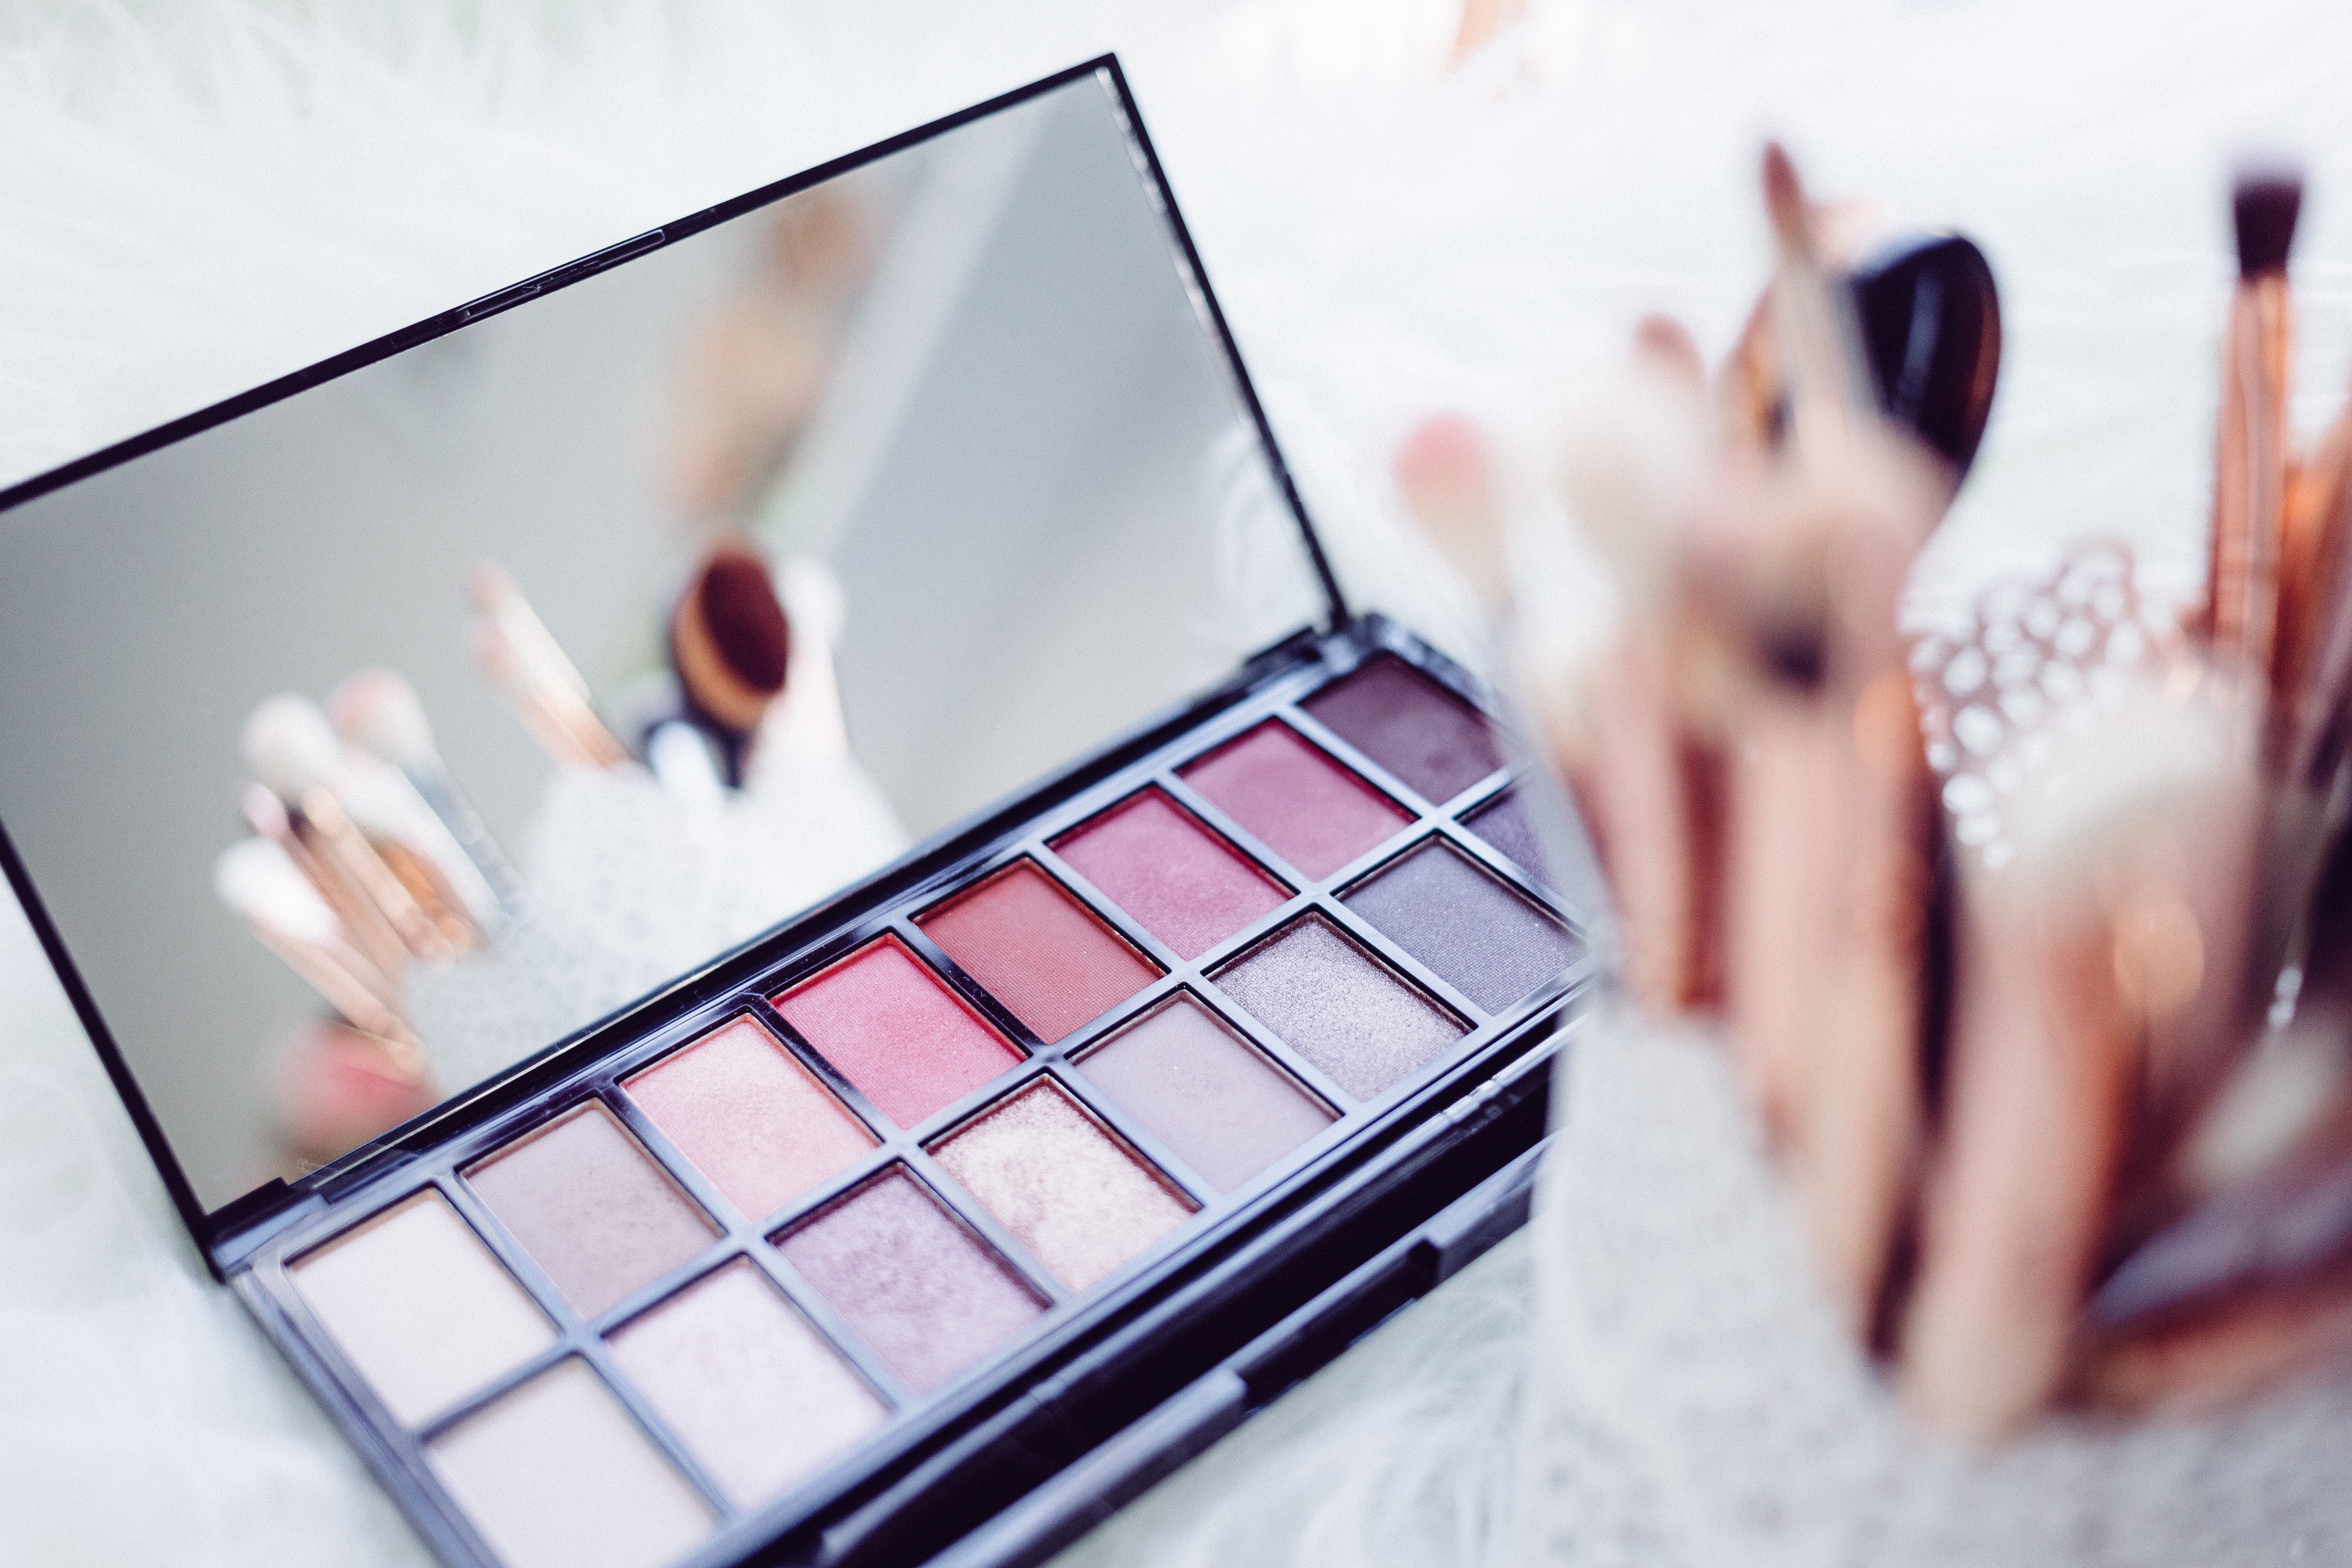 Find Hair And Makeup Artists in   Morphett Vale Get the best prices from 2,000+ of the most reviewed Hair And Makeup Artists  near Morphett Vale. Pick from mobile stylists or salons.